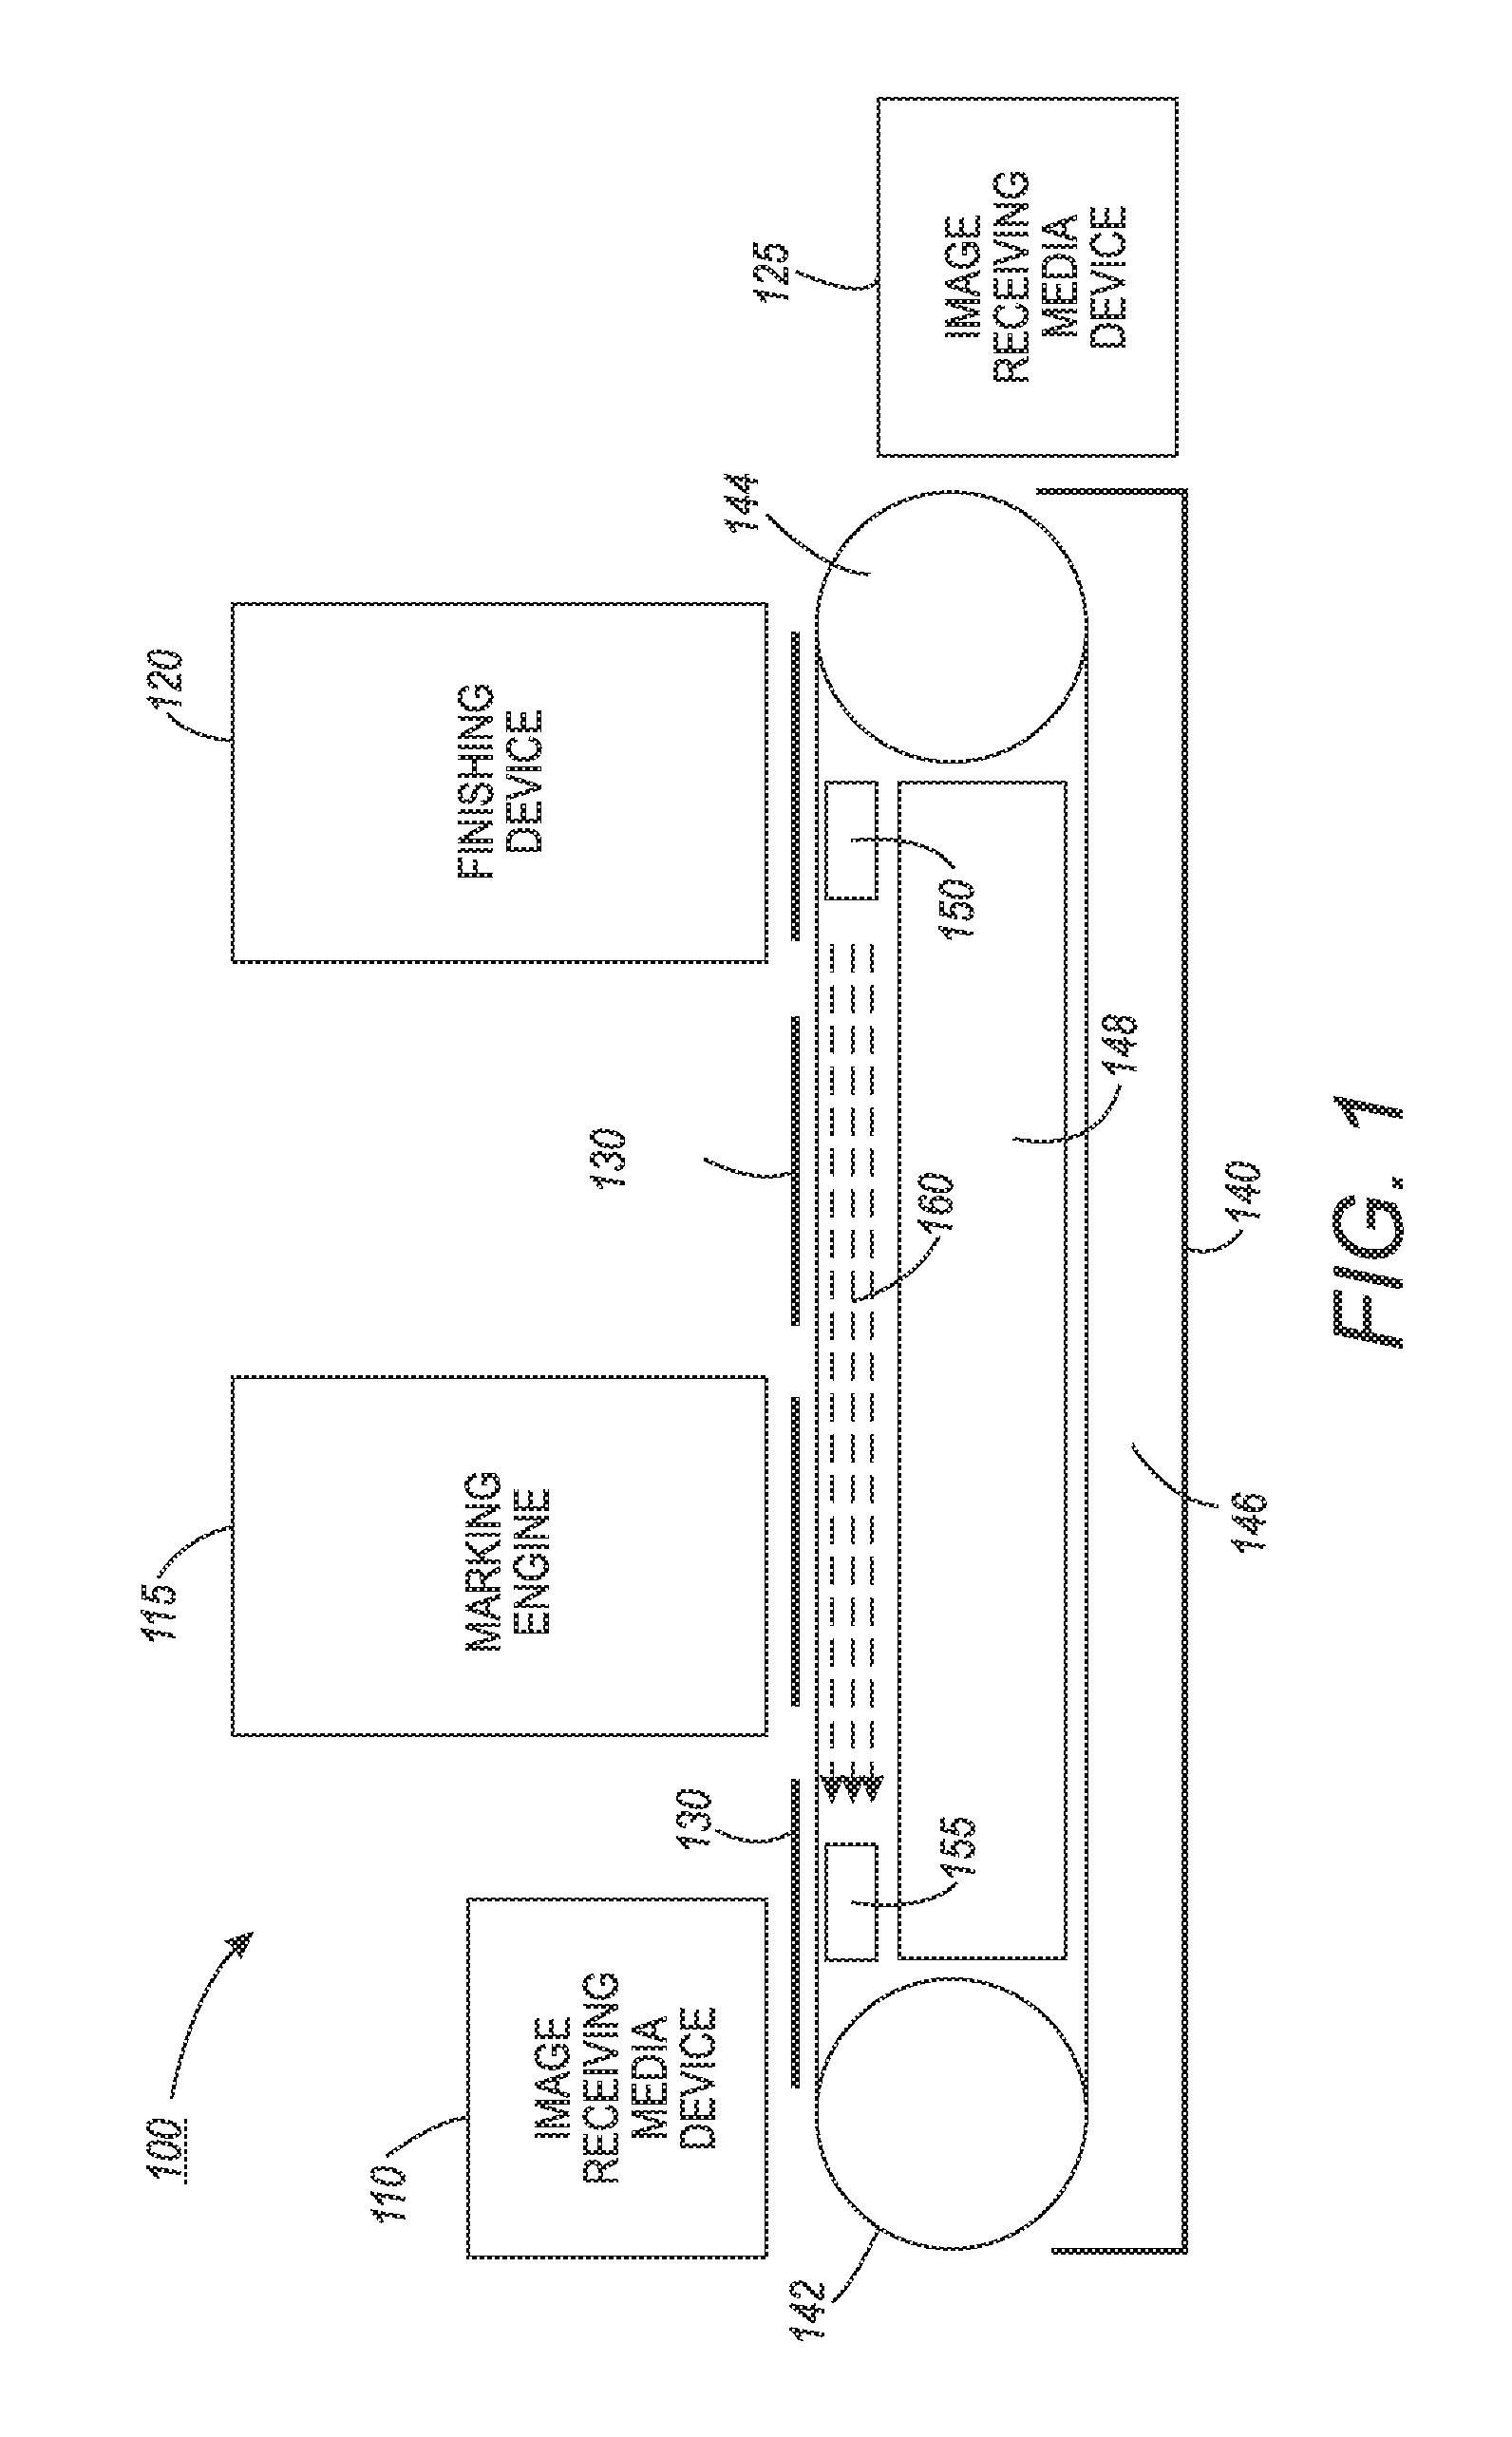 Systems and methods for implementing advanced vacuum belt transport systems